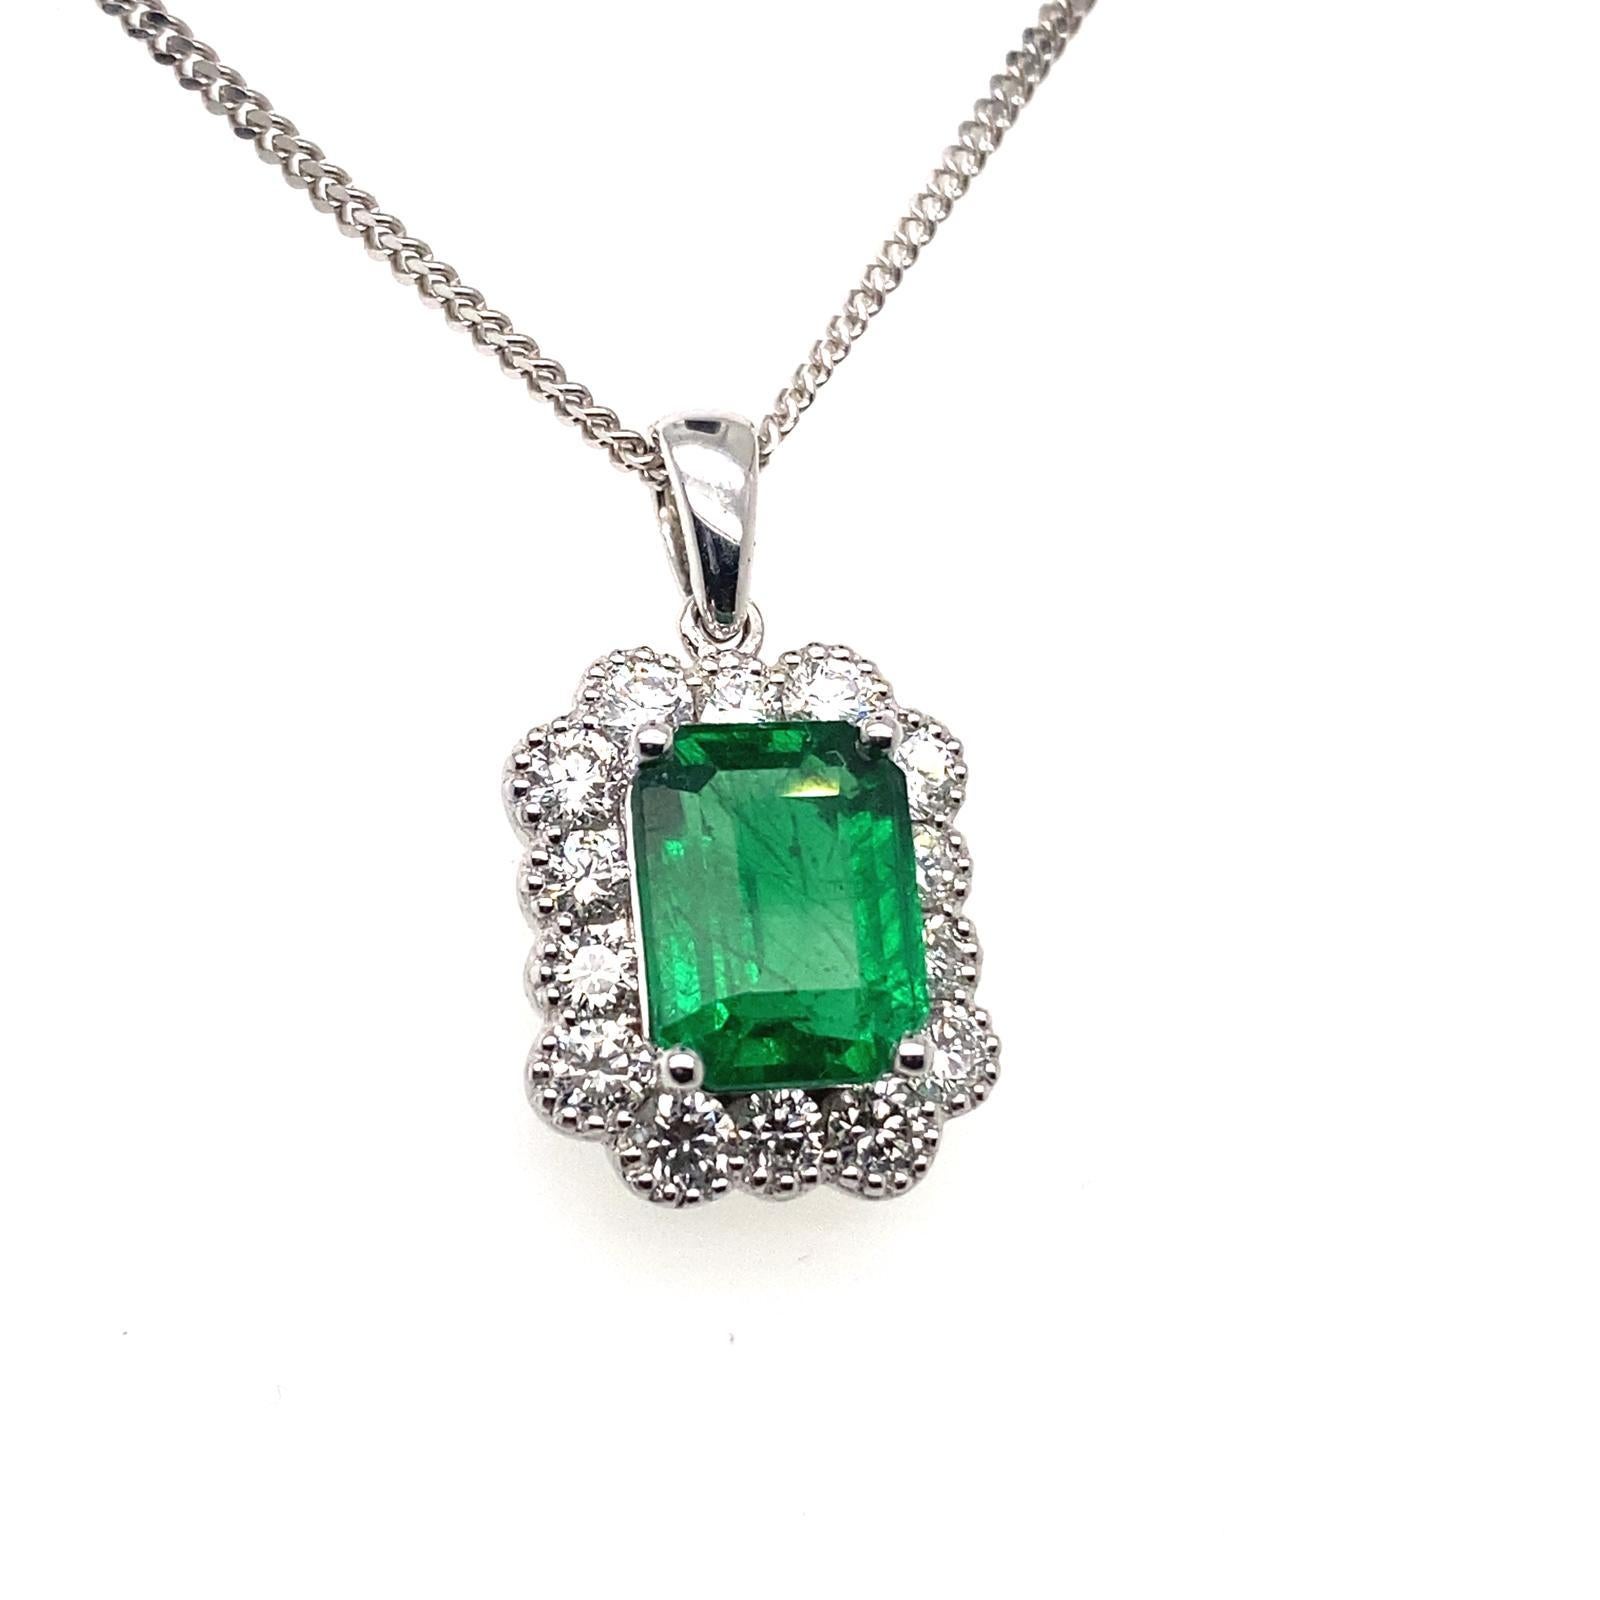 An emerald and diamond cluster pendant in 18 karat white gold.

Designed as a classic emerald cut emerald and diamond cluster.

This contemporary pendant features a deep green emerald cut emerald with a known weight of 1.76cts within a halo surround